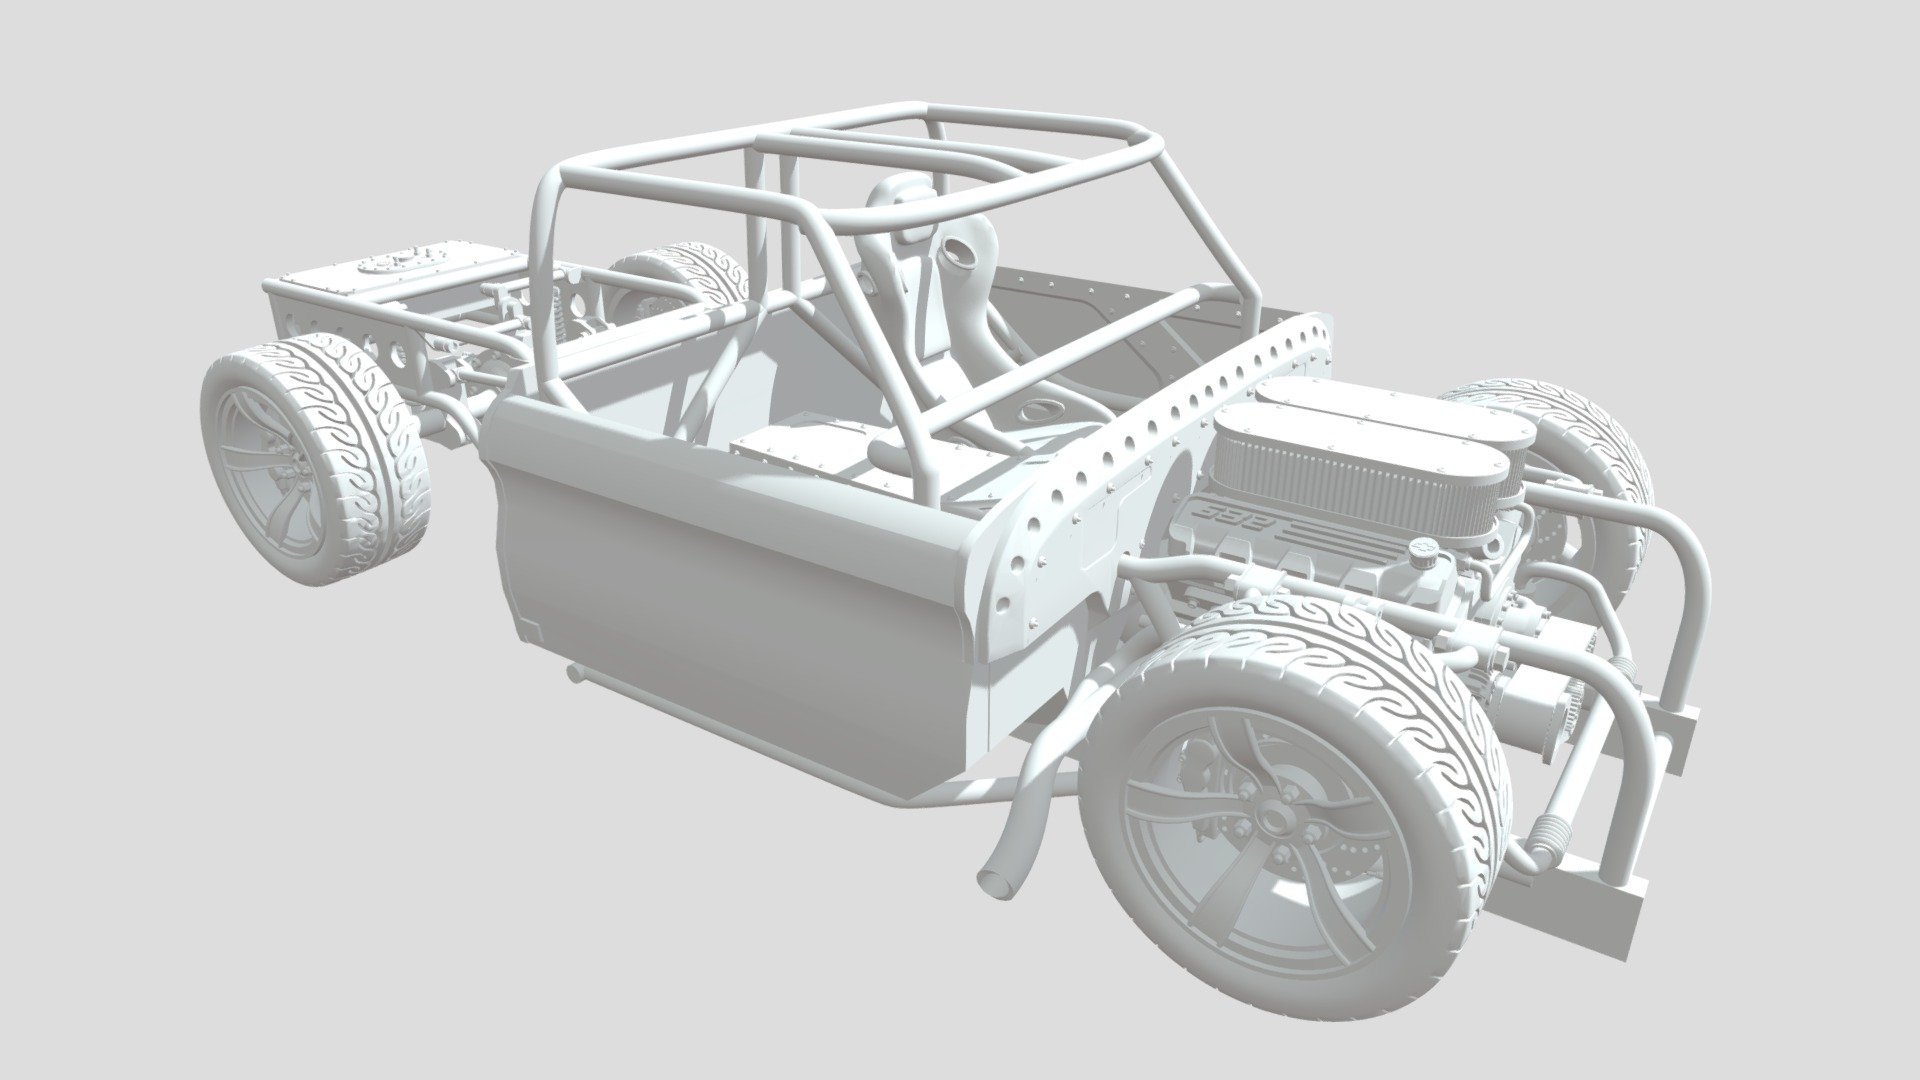 This is a transkit I created for the Revell 1966 Chevrolet Fleetside Pickup kit. You will need the Body, glass, and trim from the kit. Everything else is 3D printed.

This can be found on my website : https://www.hobbiwerks.com/product/1966customchassis/ - 1966 Chevrolet Fleetside Pickup Custom - 3D model by HobbiWerks 3d model